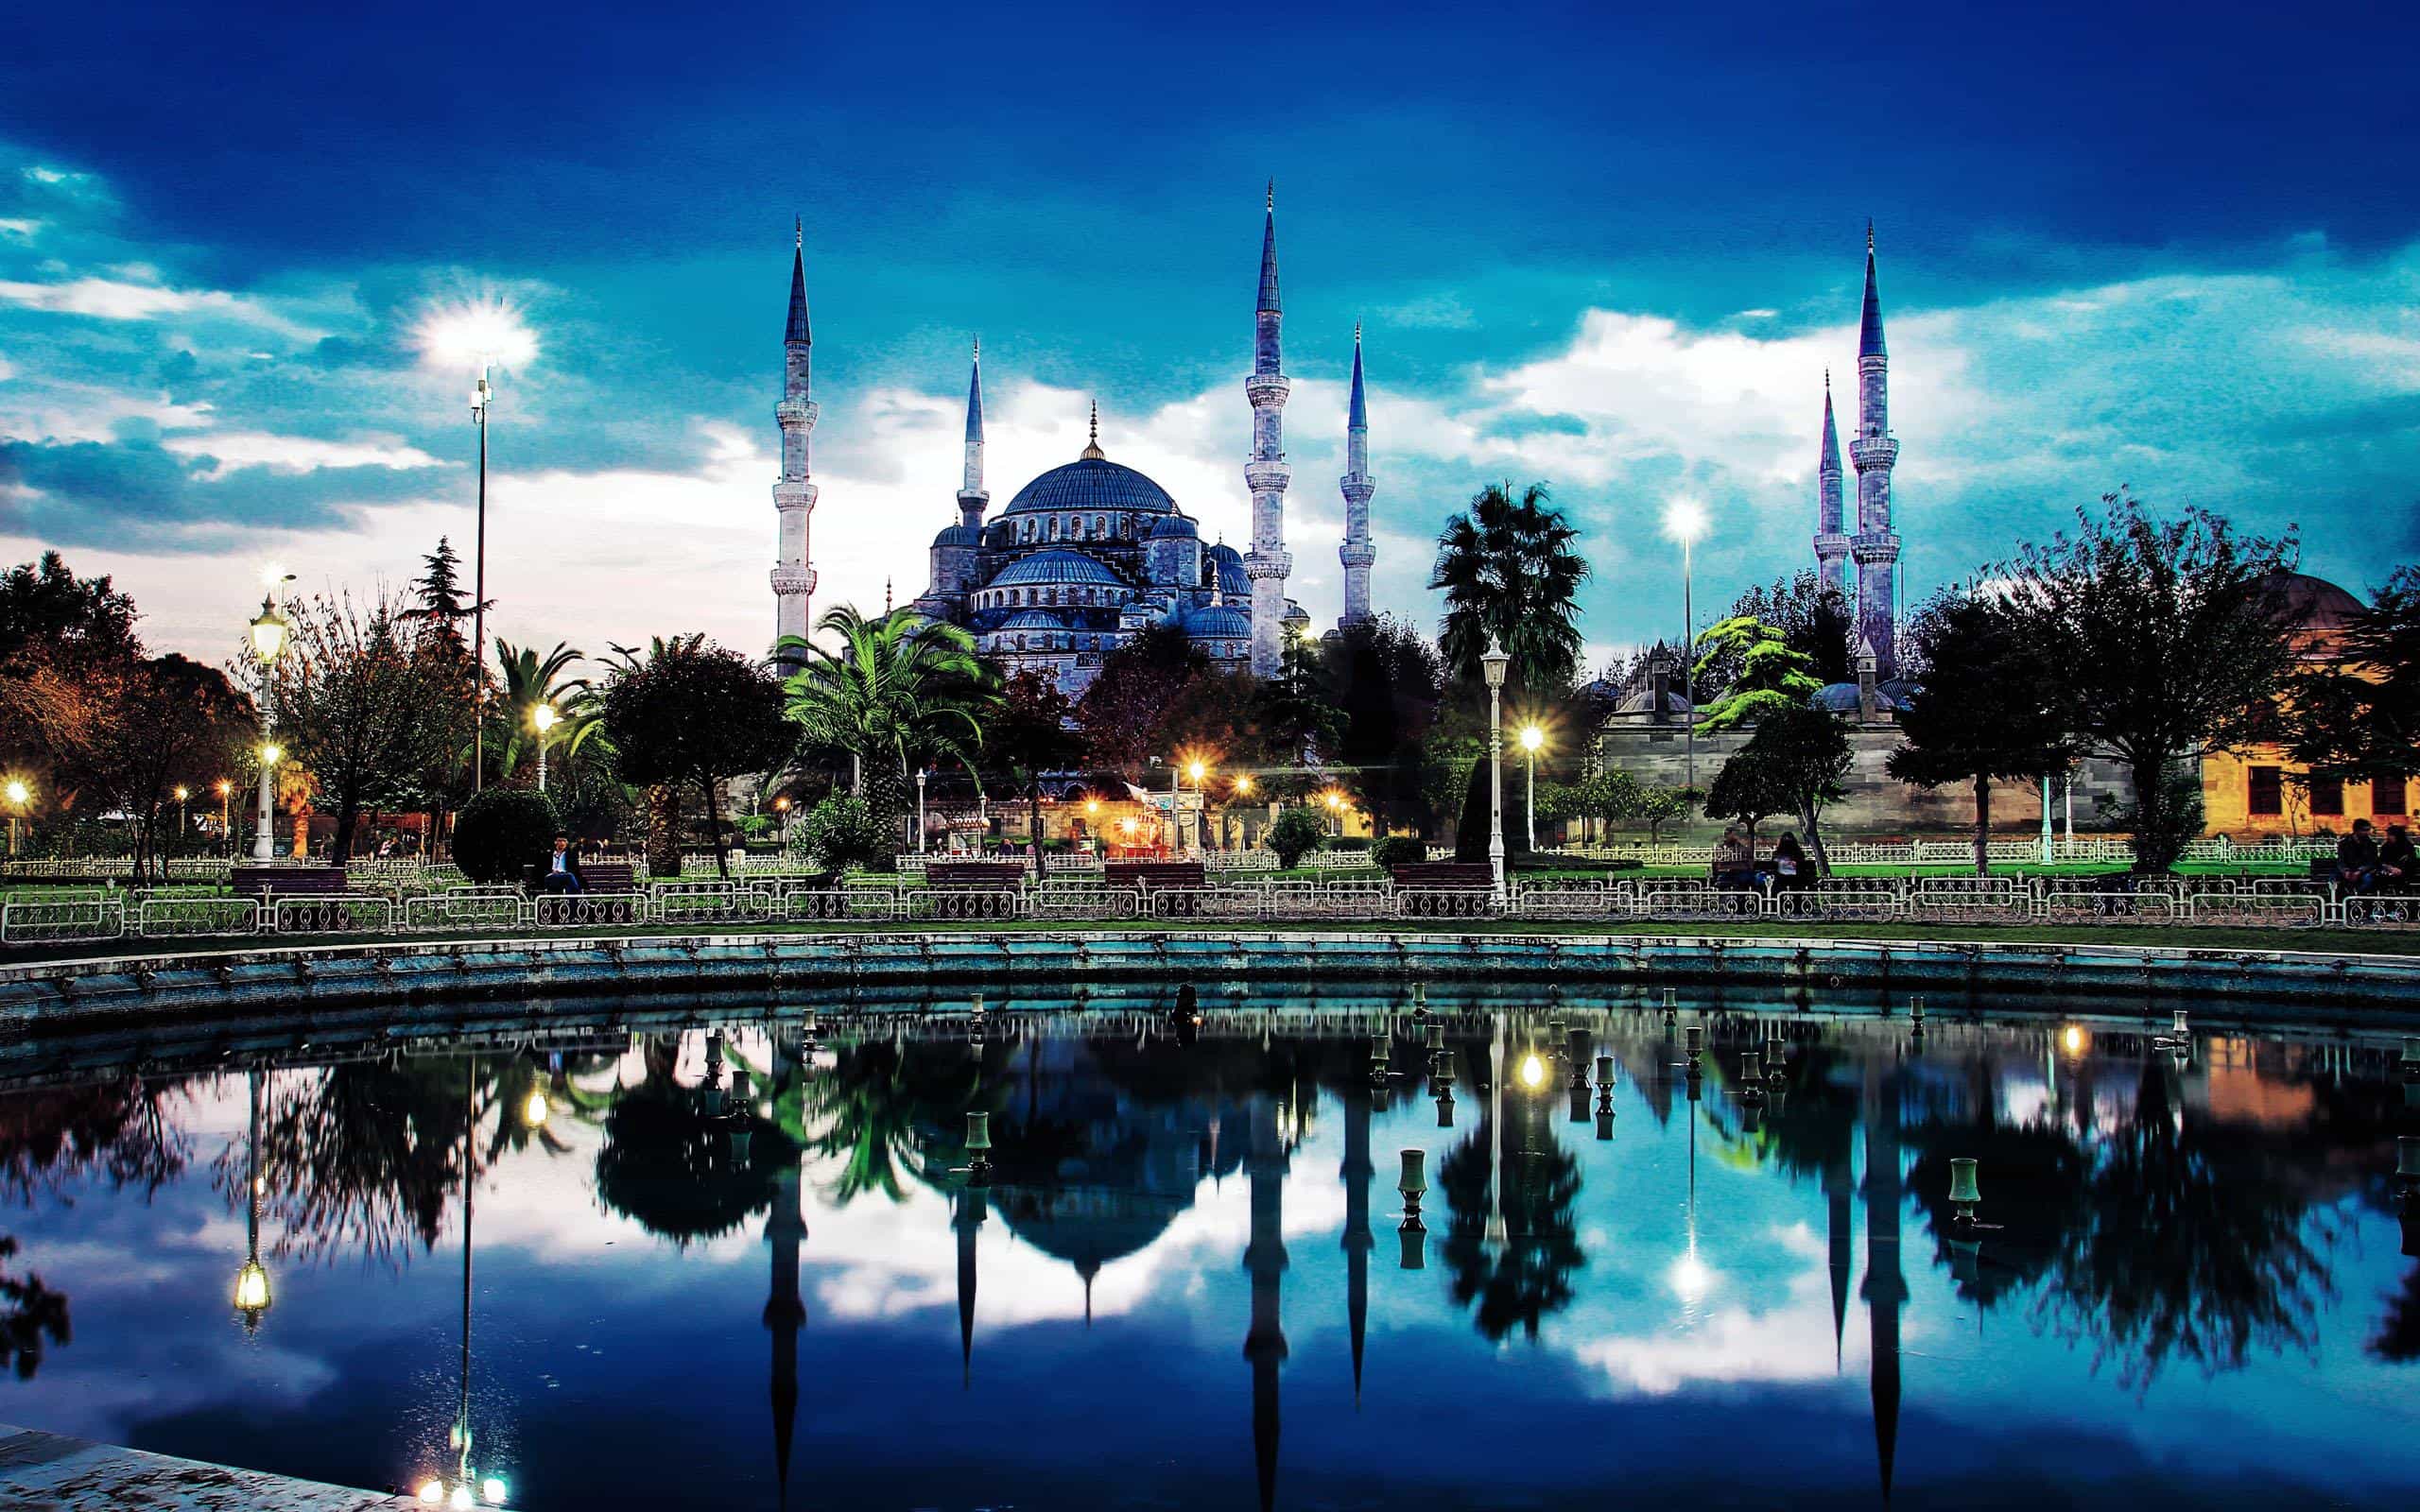 blue mosque in istanbul, turkey